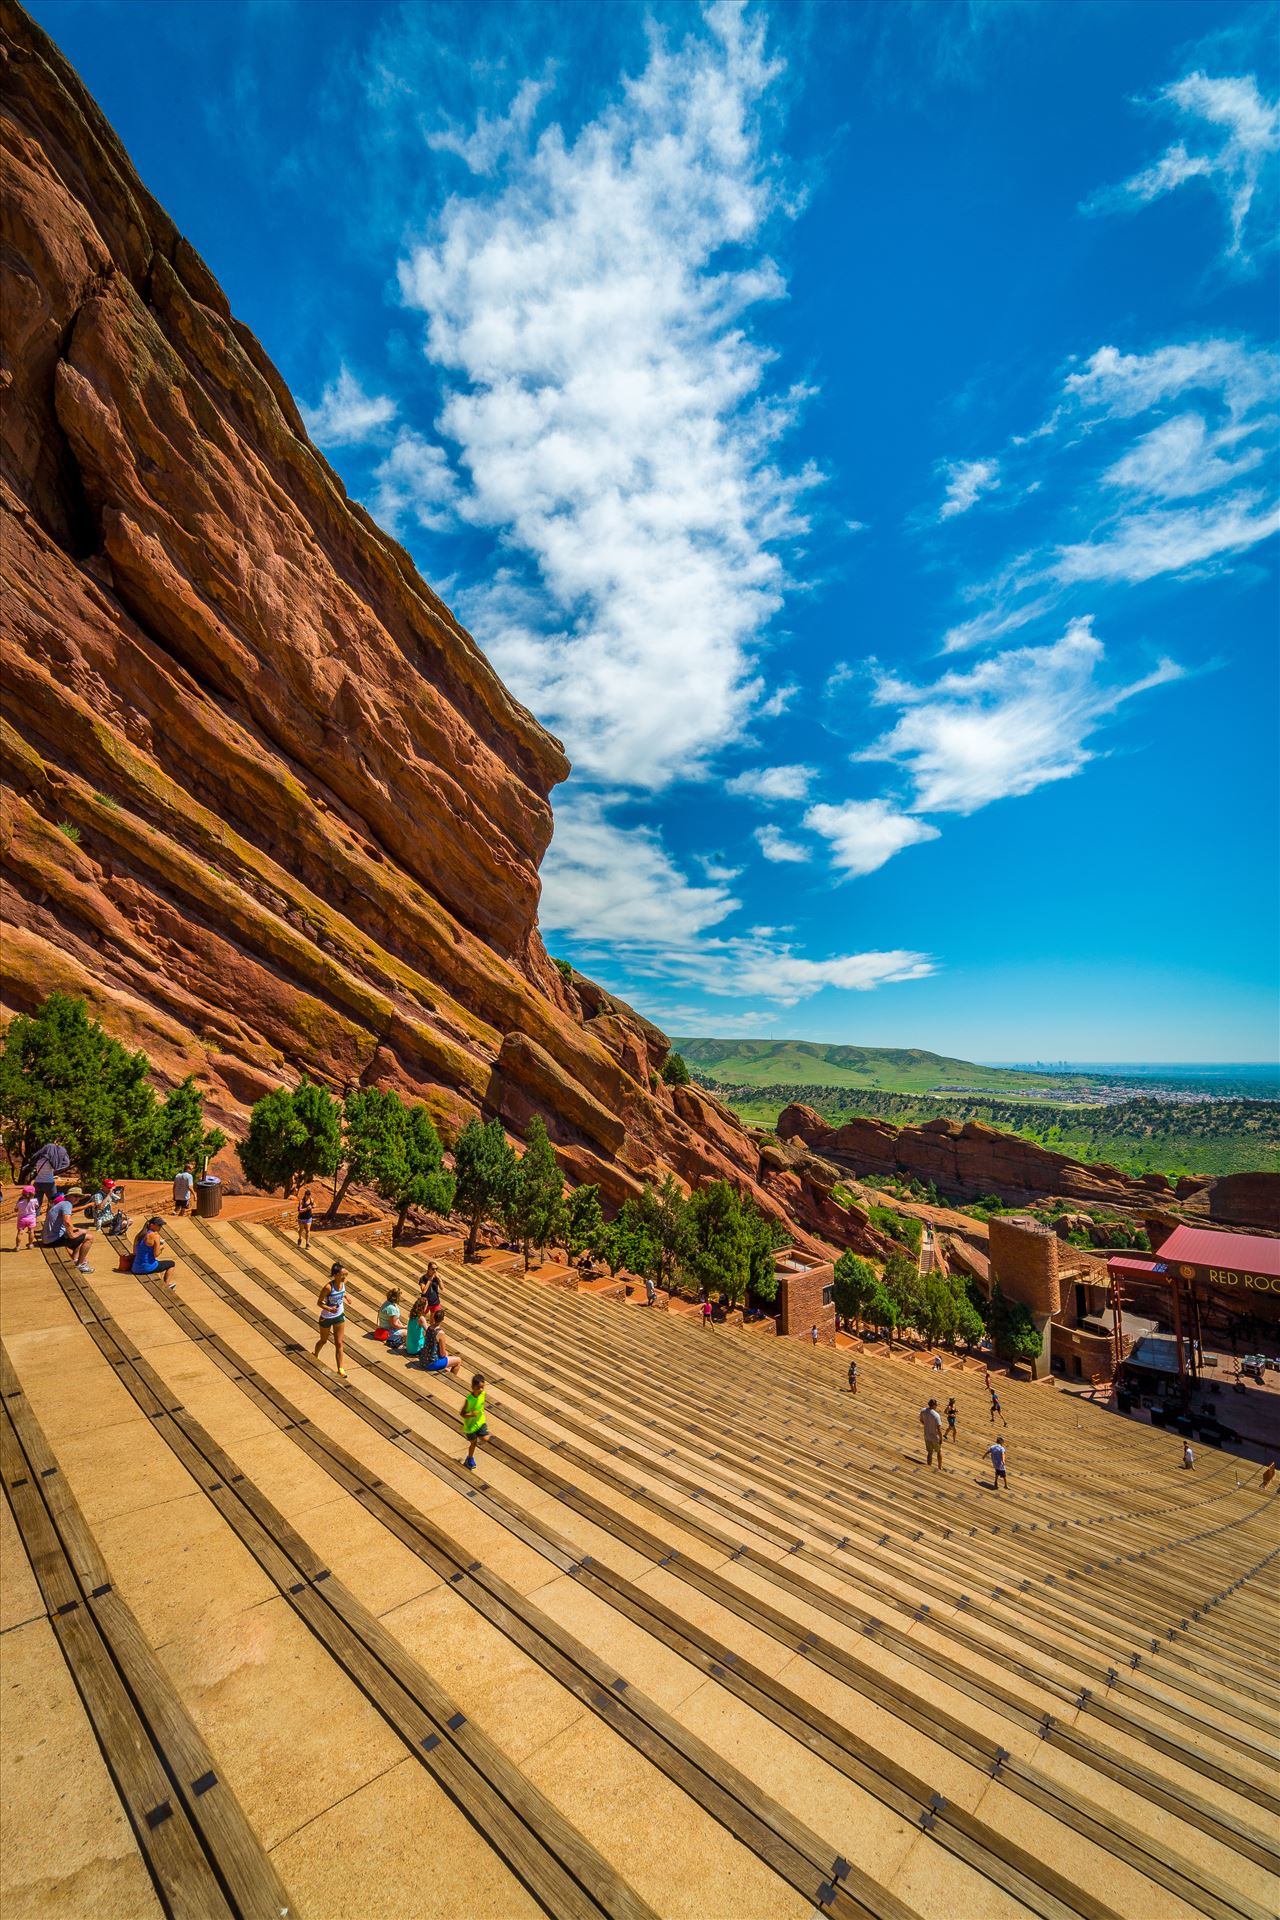 Red Rocks Amphitheater - People getting a workout at Red Rocks amphitheater on a warm Sunday morning. by Scott Smith Photos